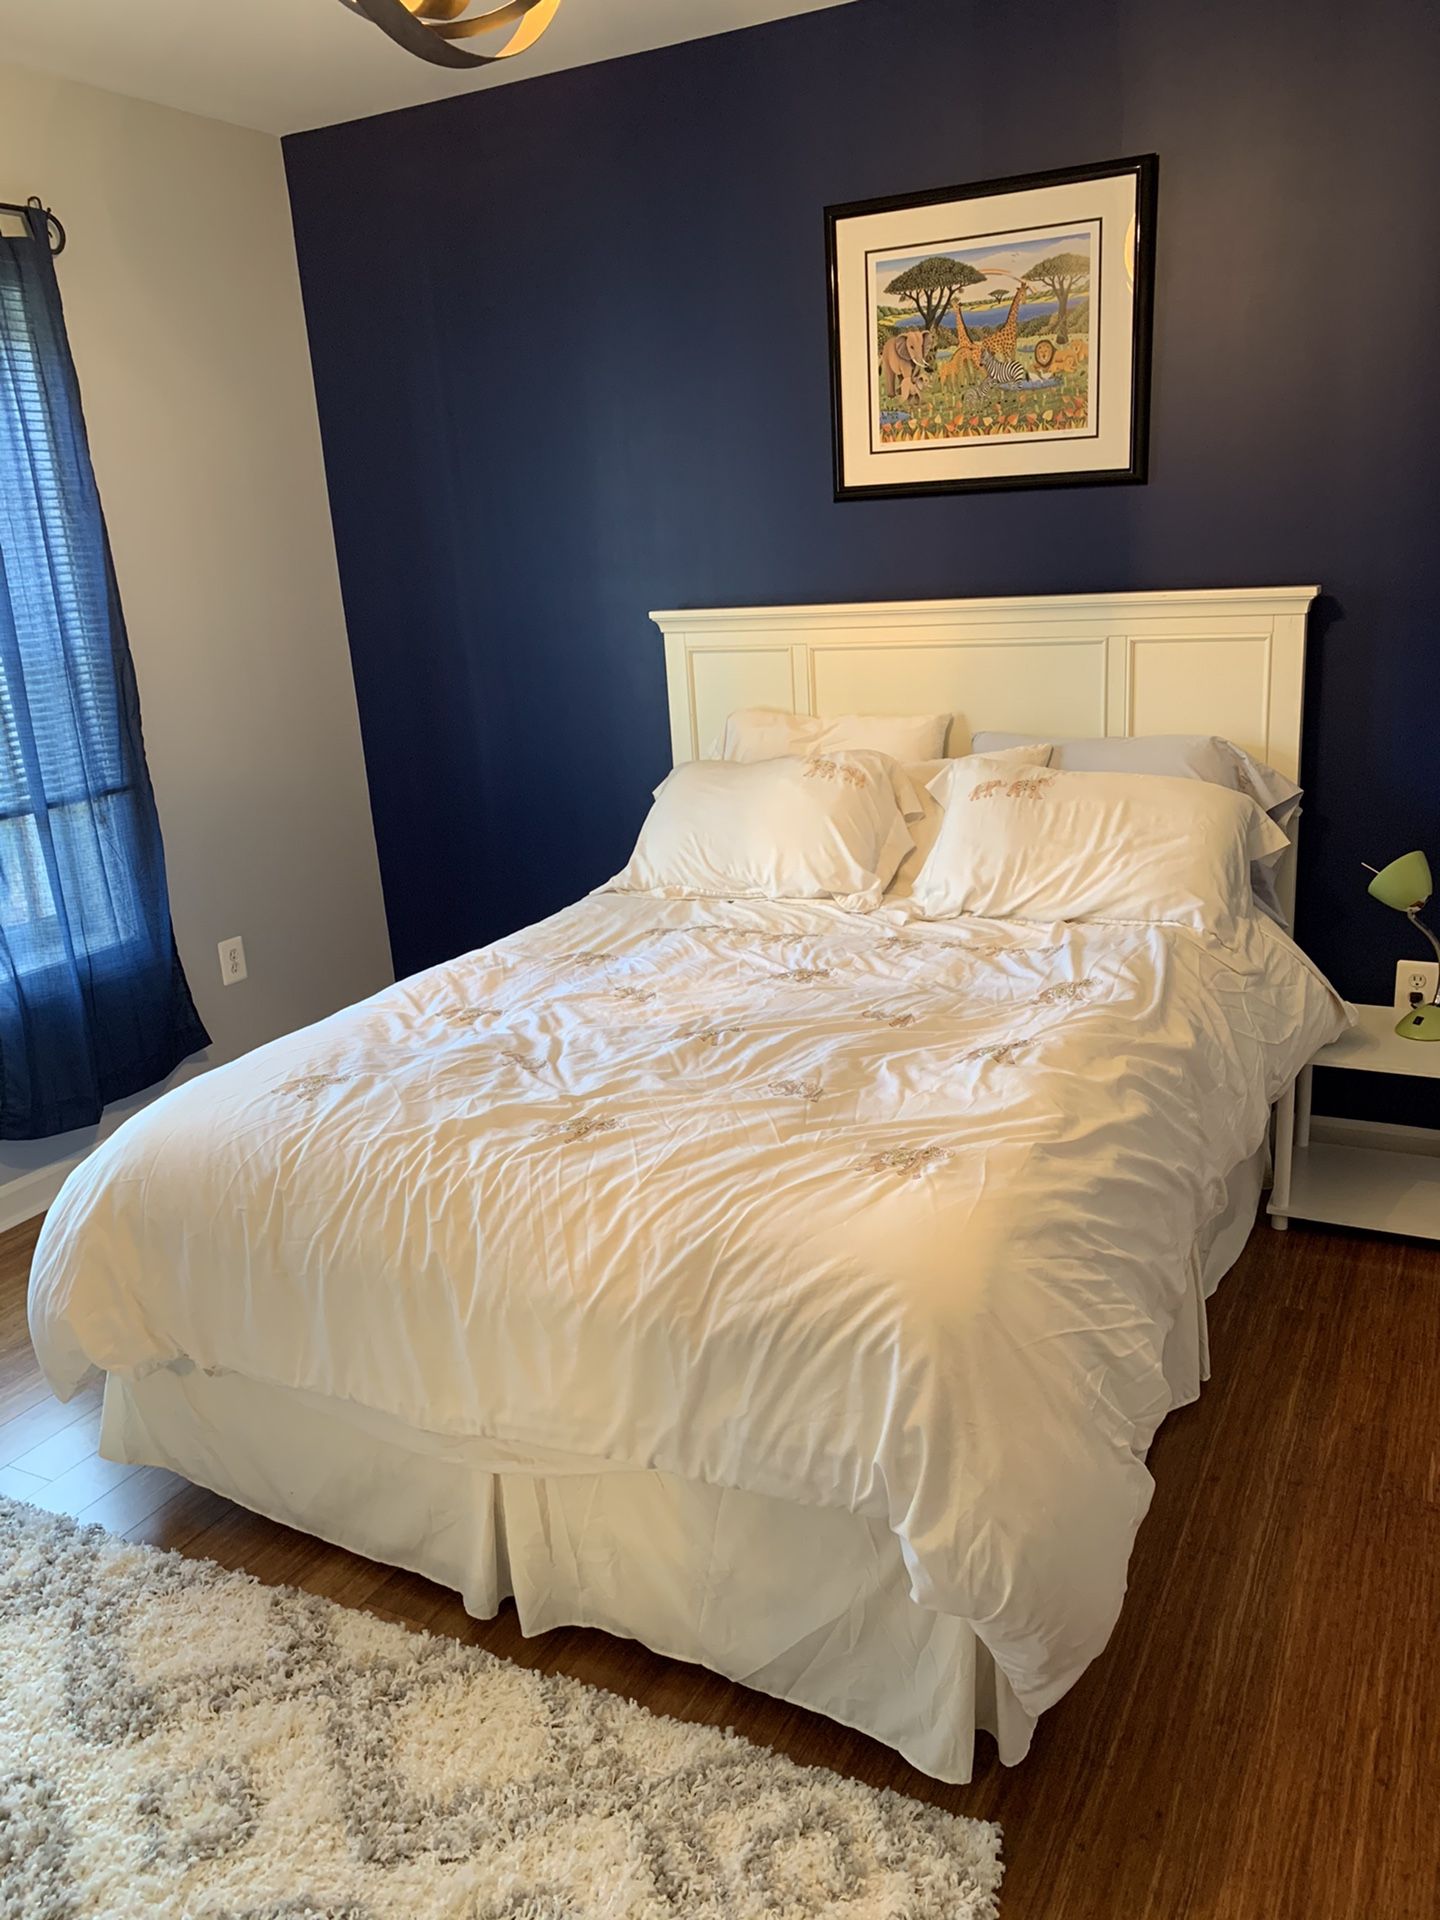 Queen mattress and bed frame combo